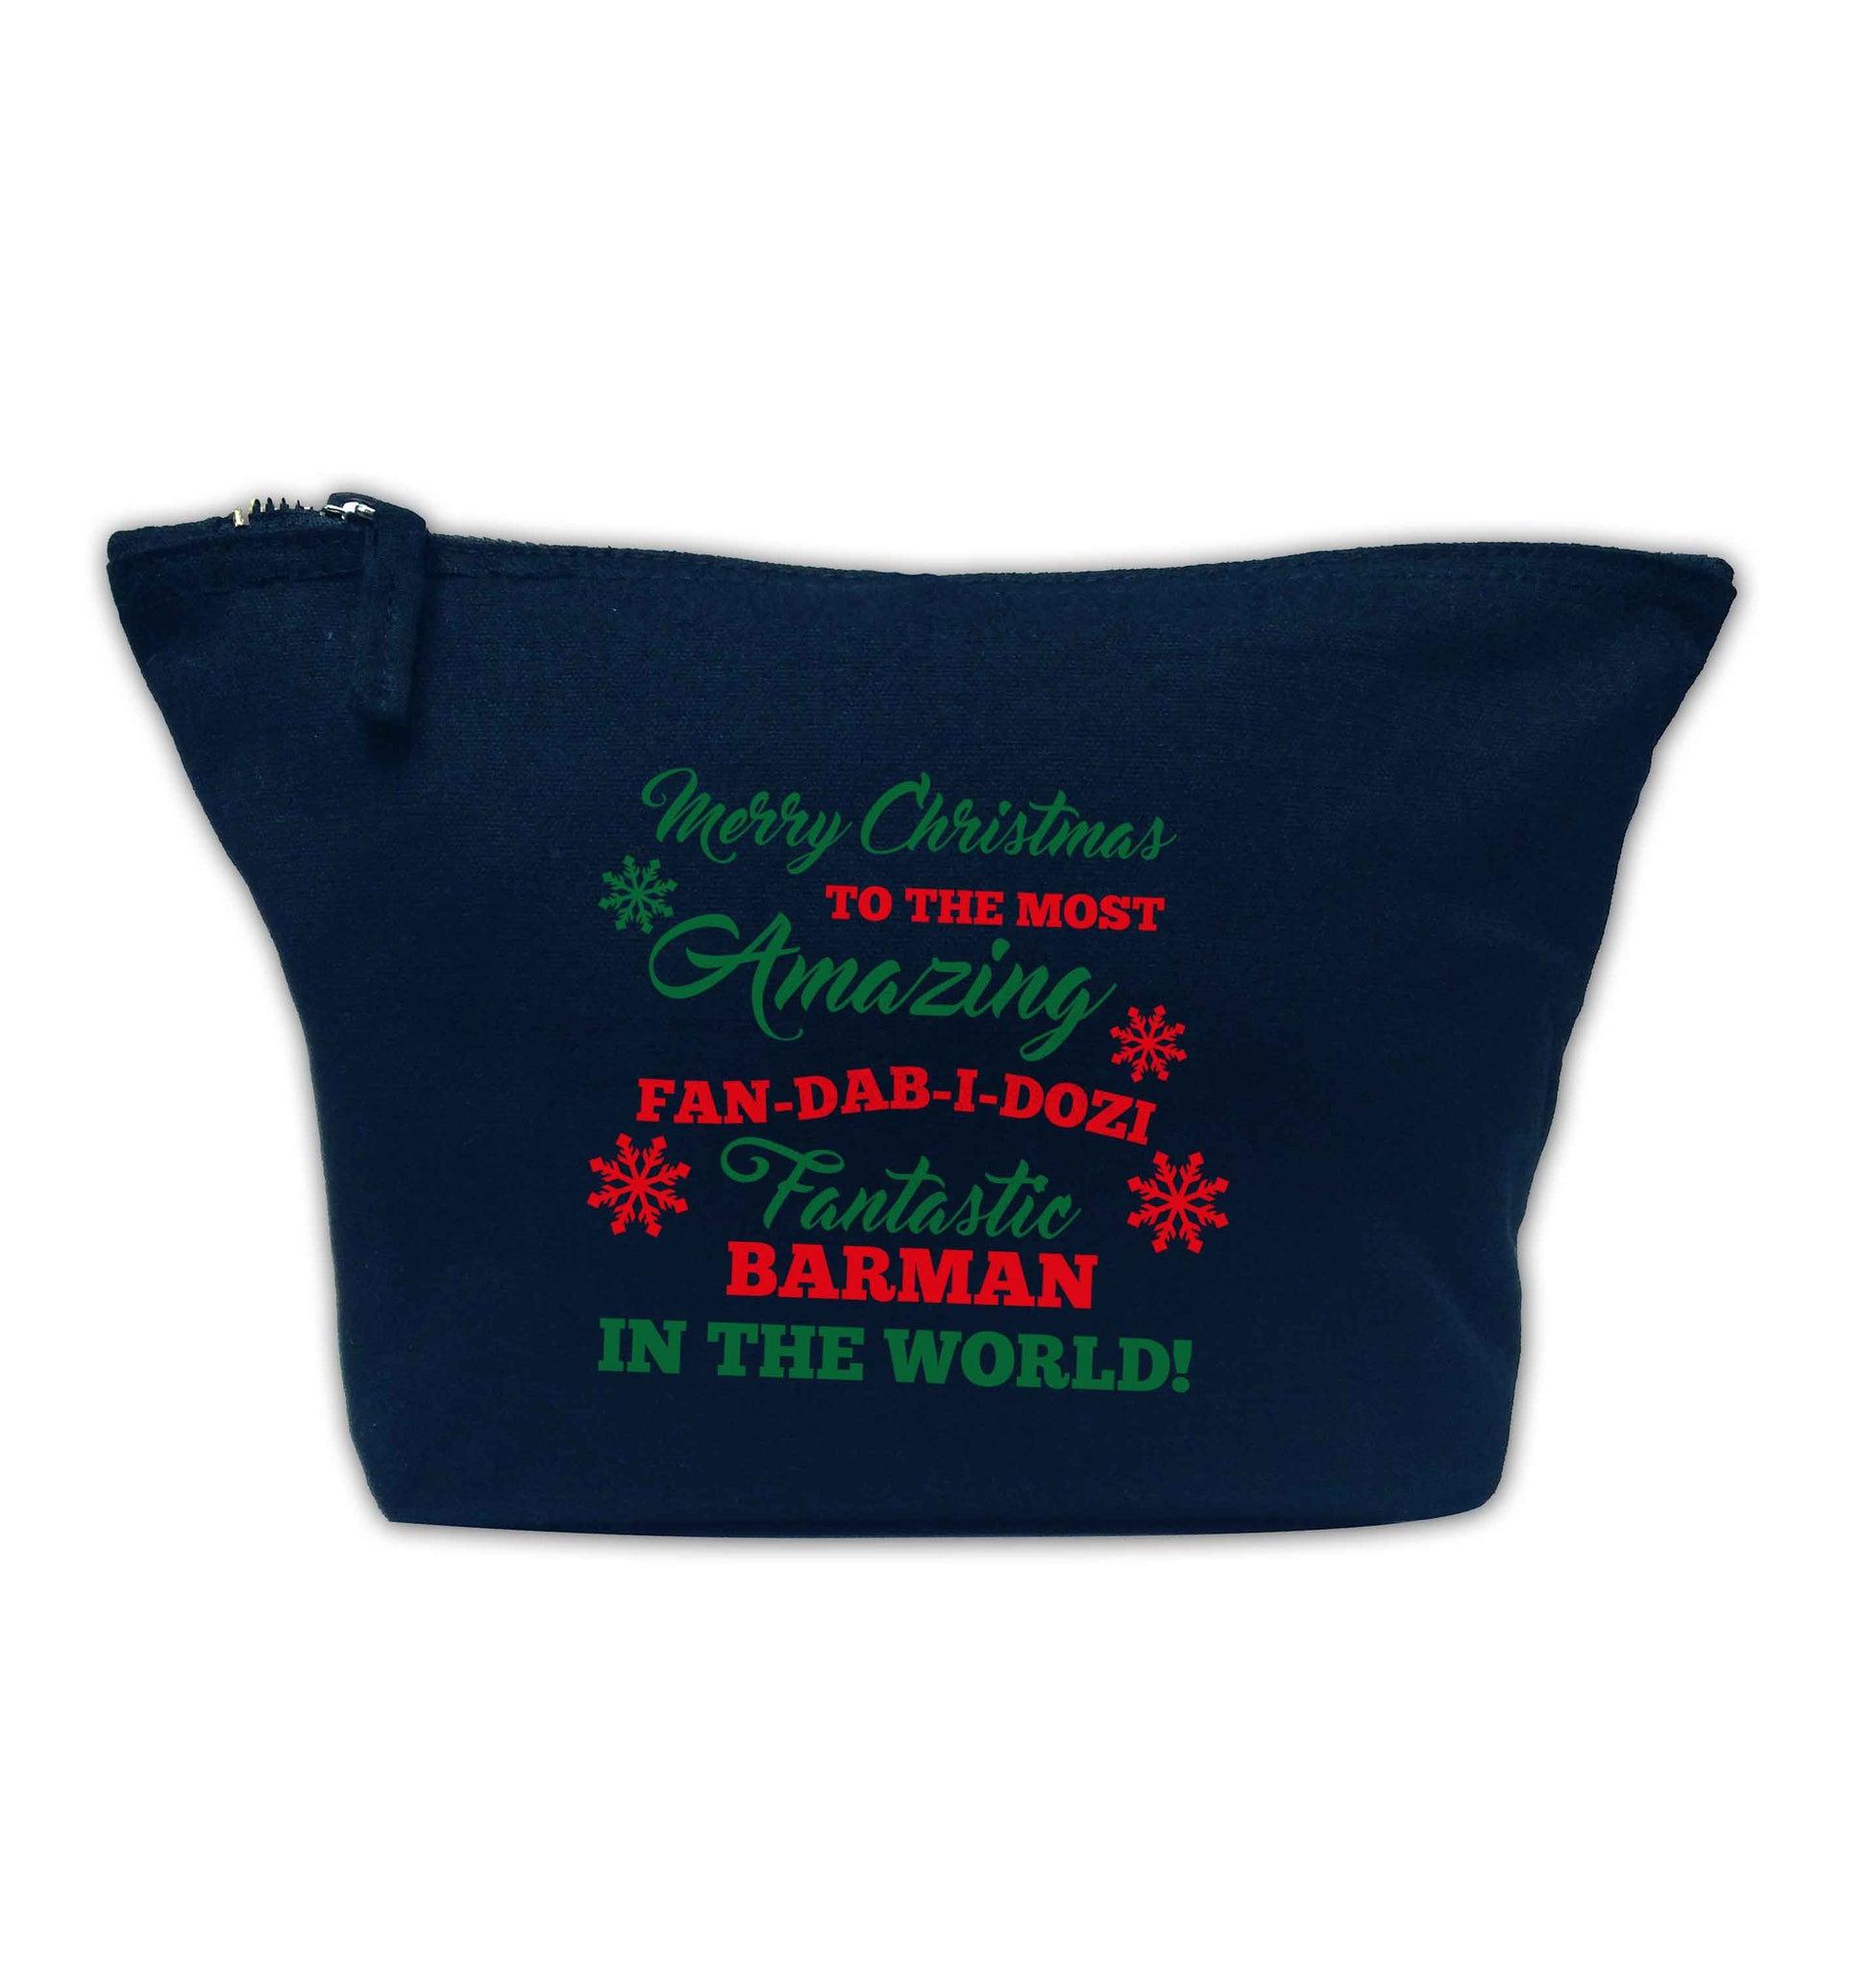 Merry Christmas to the most amazing barman in the world! navy makeup bag